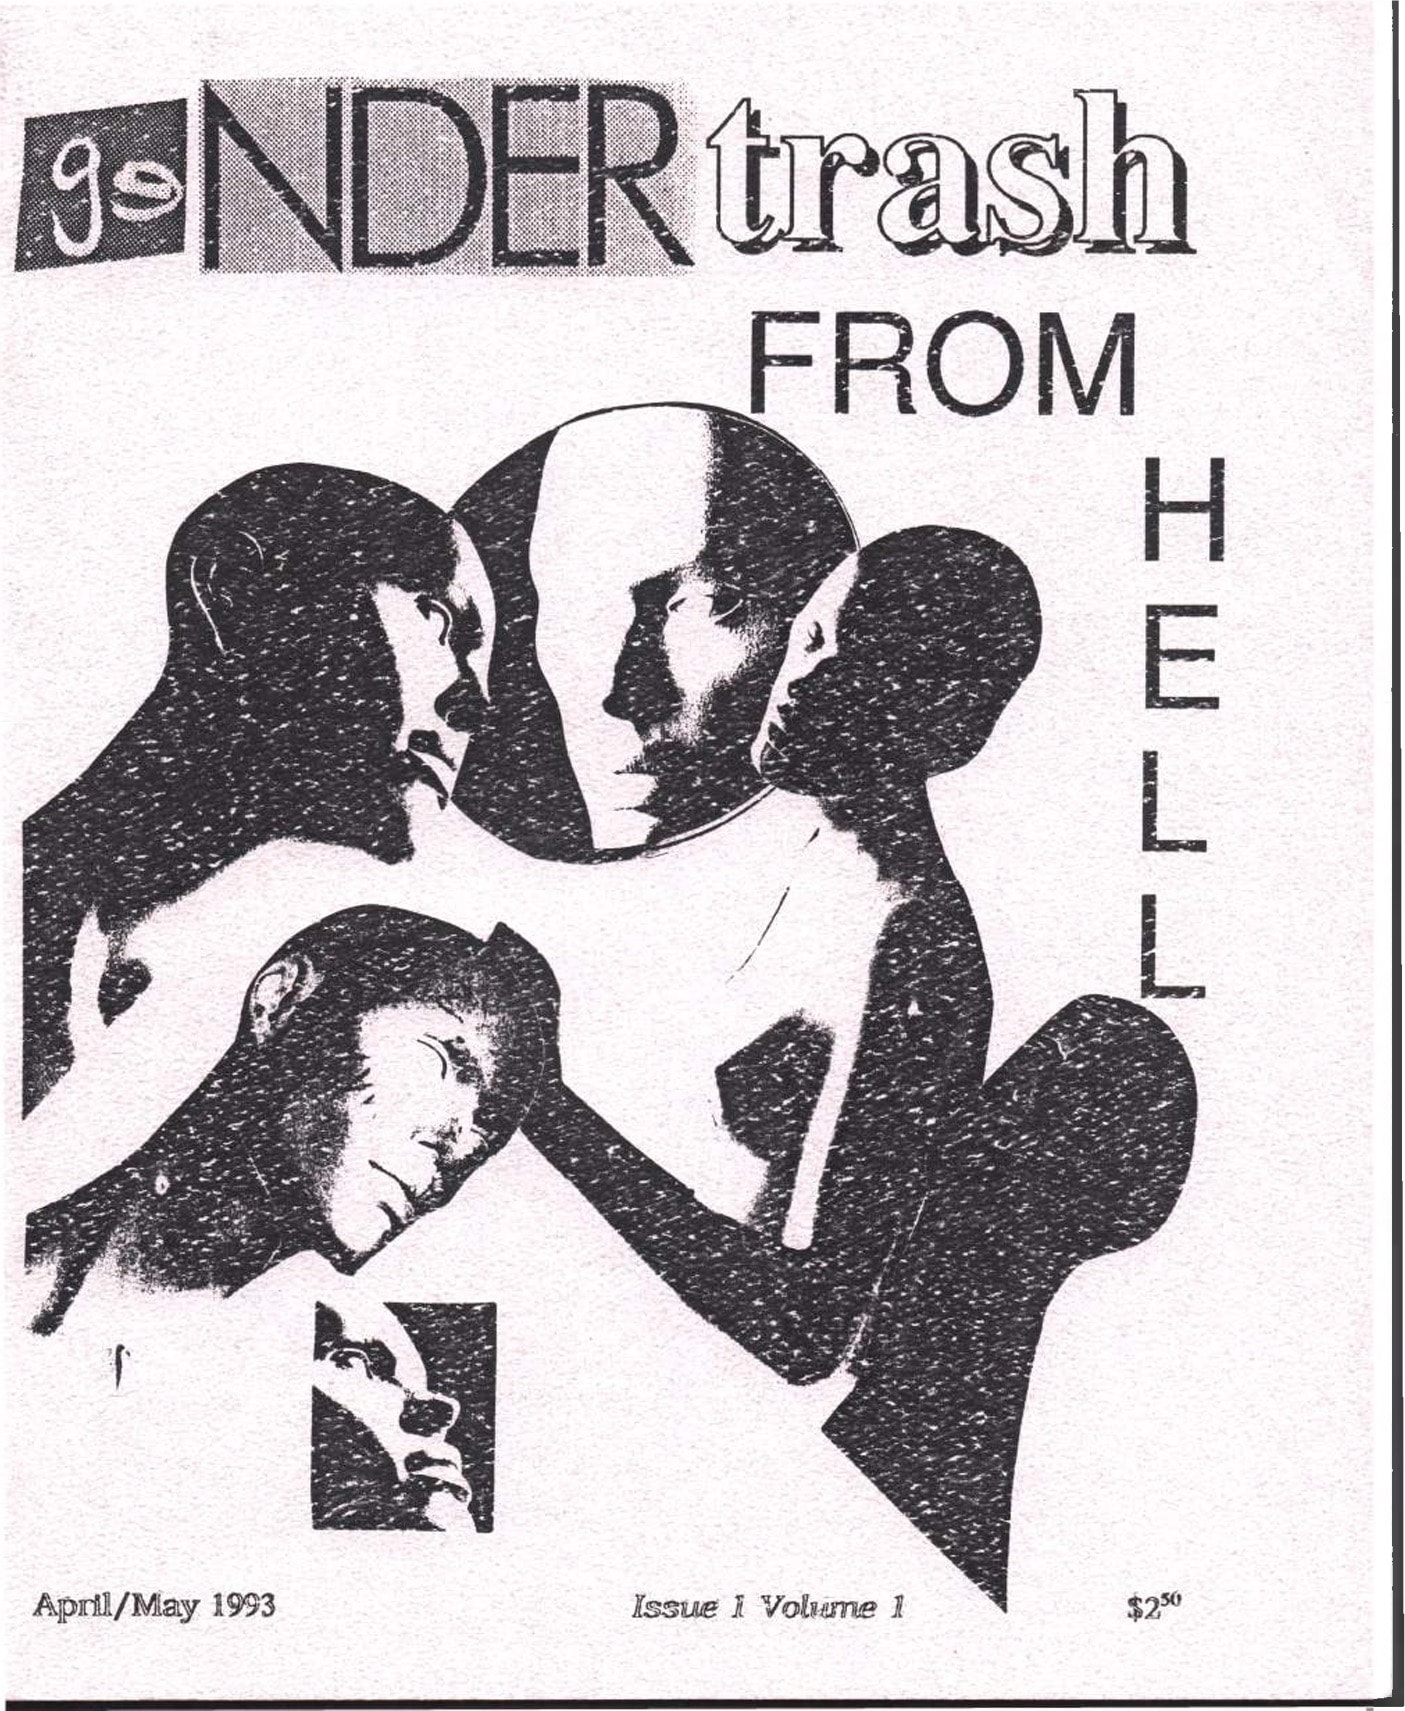 Collage of mannequin faces and text collage of the title, “Gendertrash from Hell” using cutout words and letters. Additional typed text at the bottom of the page reads, “April/May 1993; Issue 1 Volume 1; $2.50.”